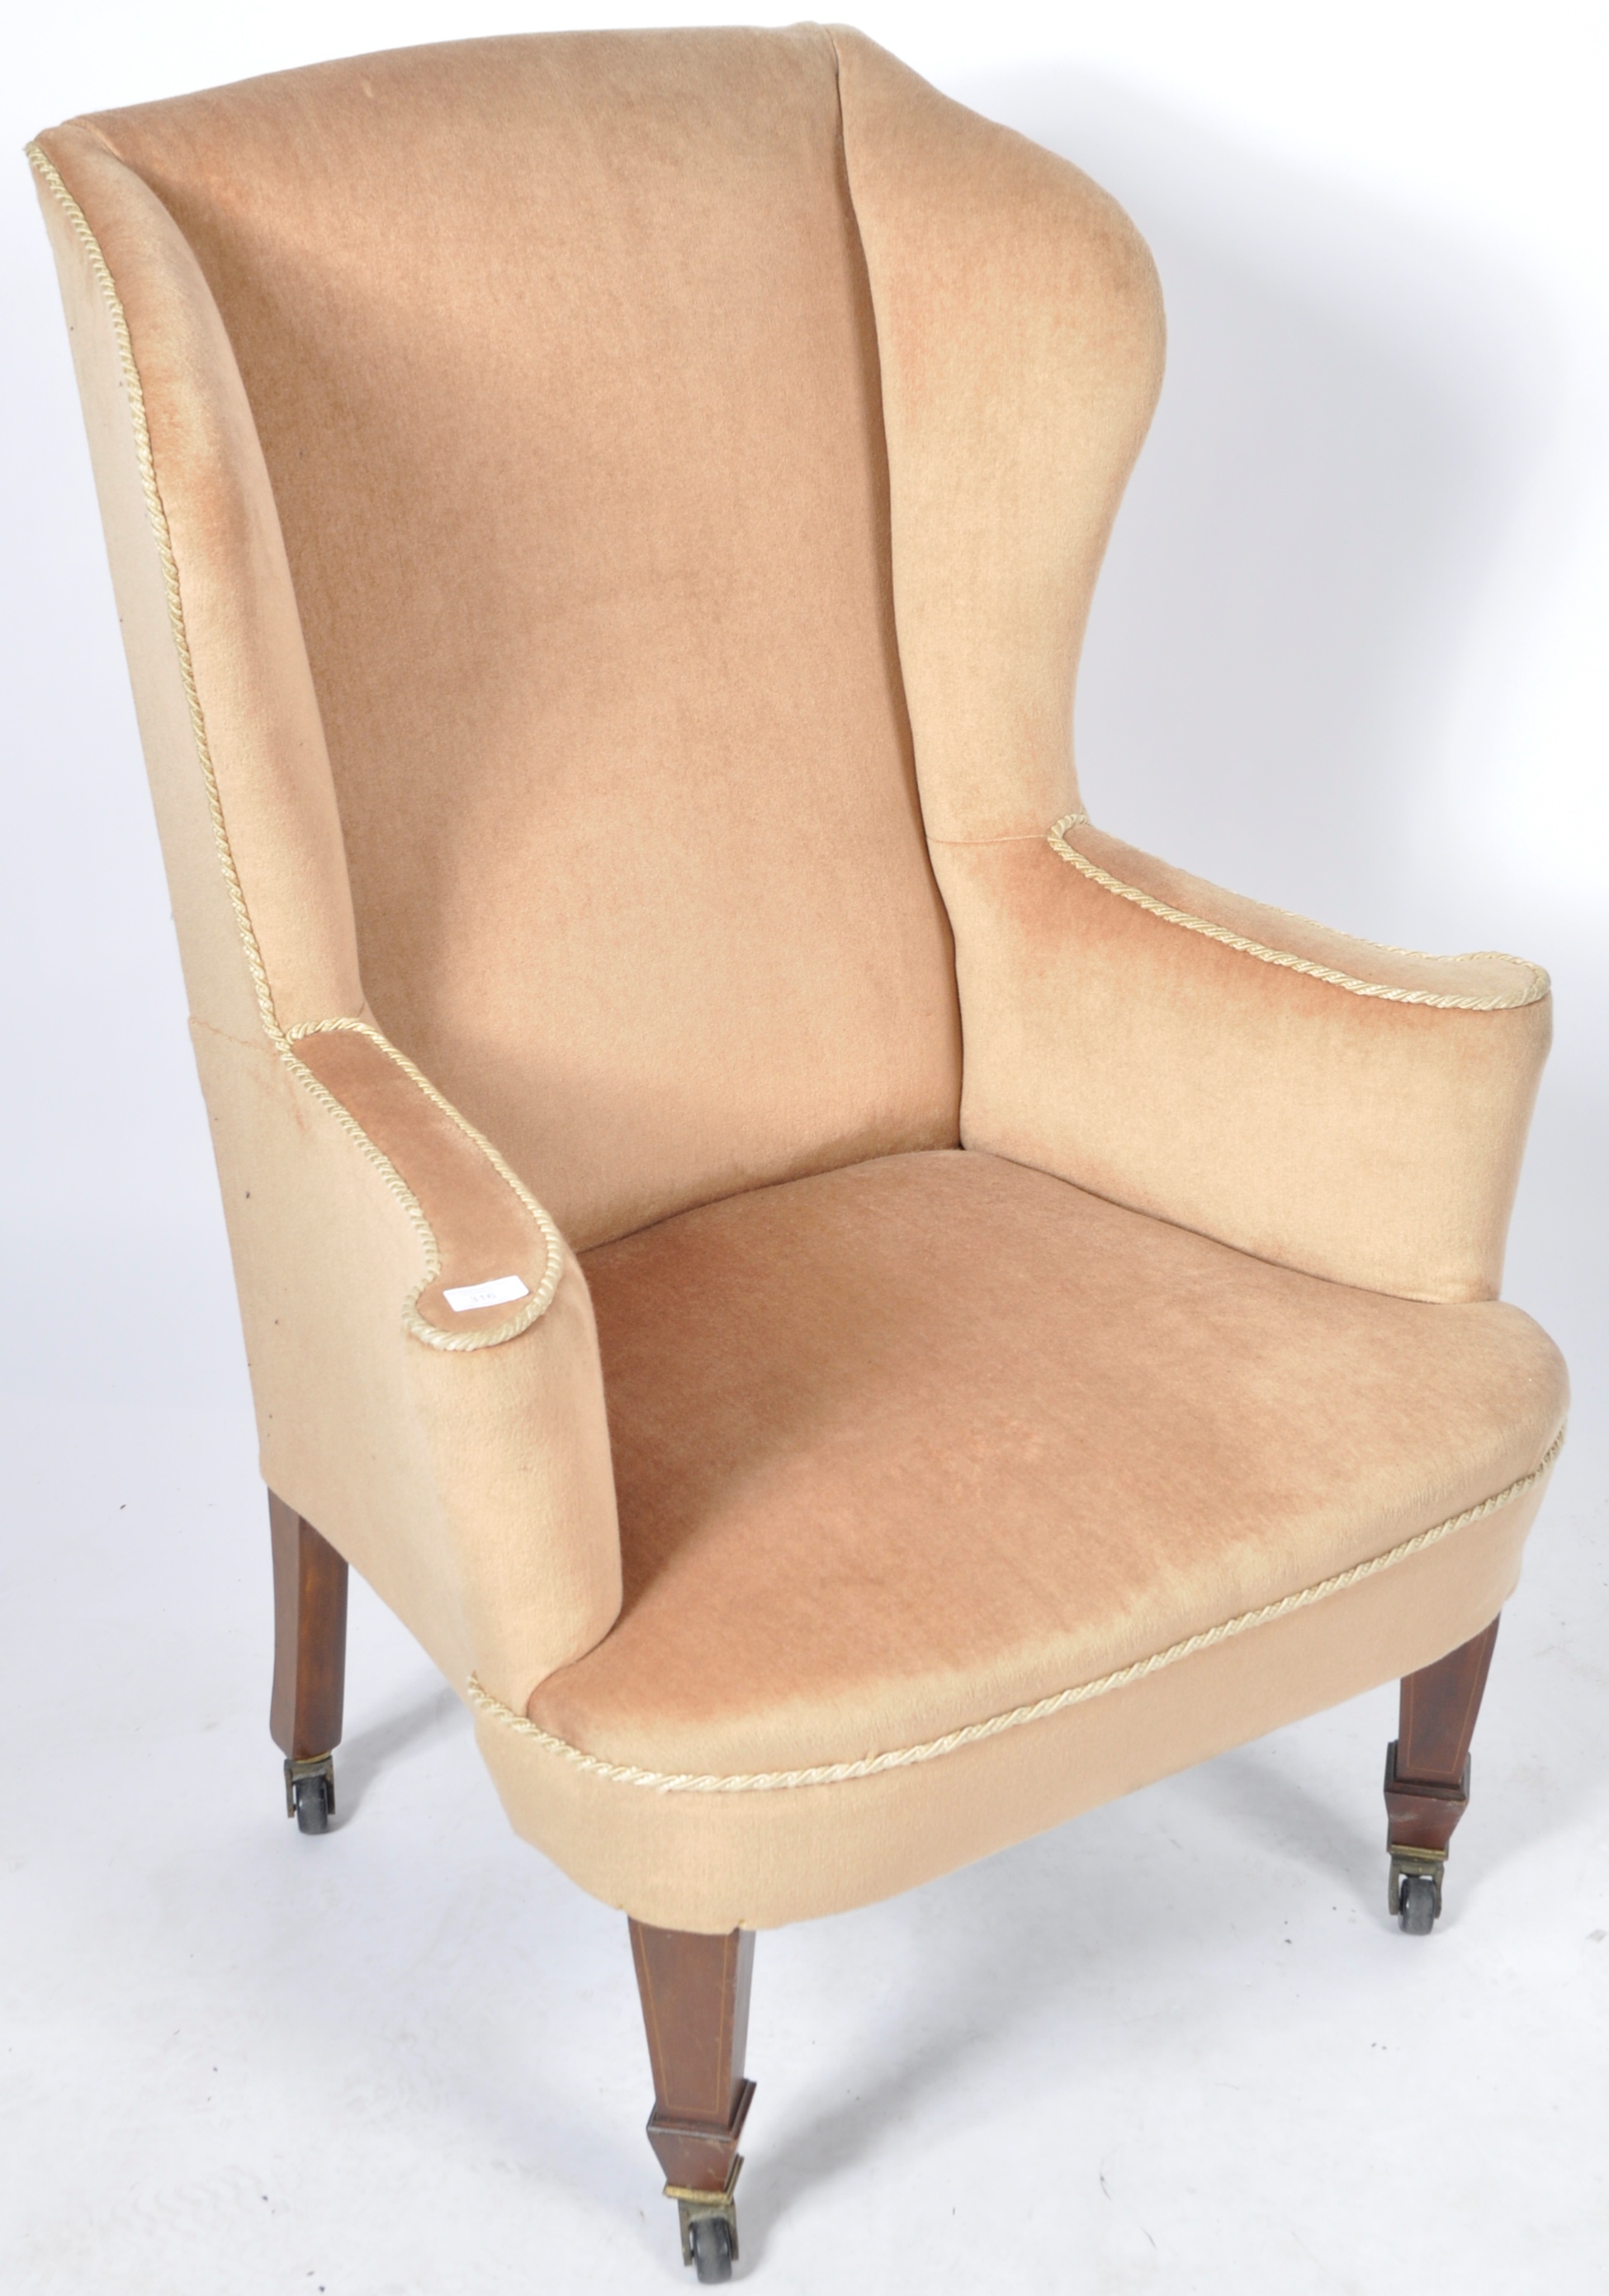 ANTIQUE 19TH CENTURY WINGBACK FIRESIDE ARMCHAIR - Image 2 of 6